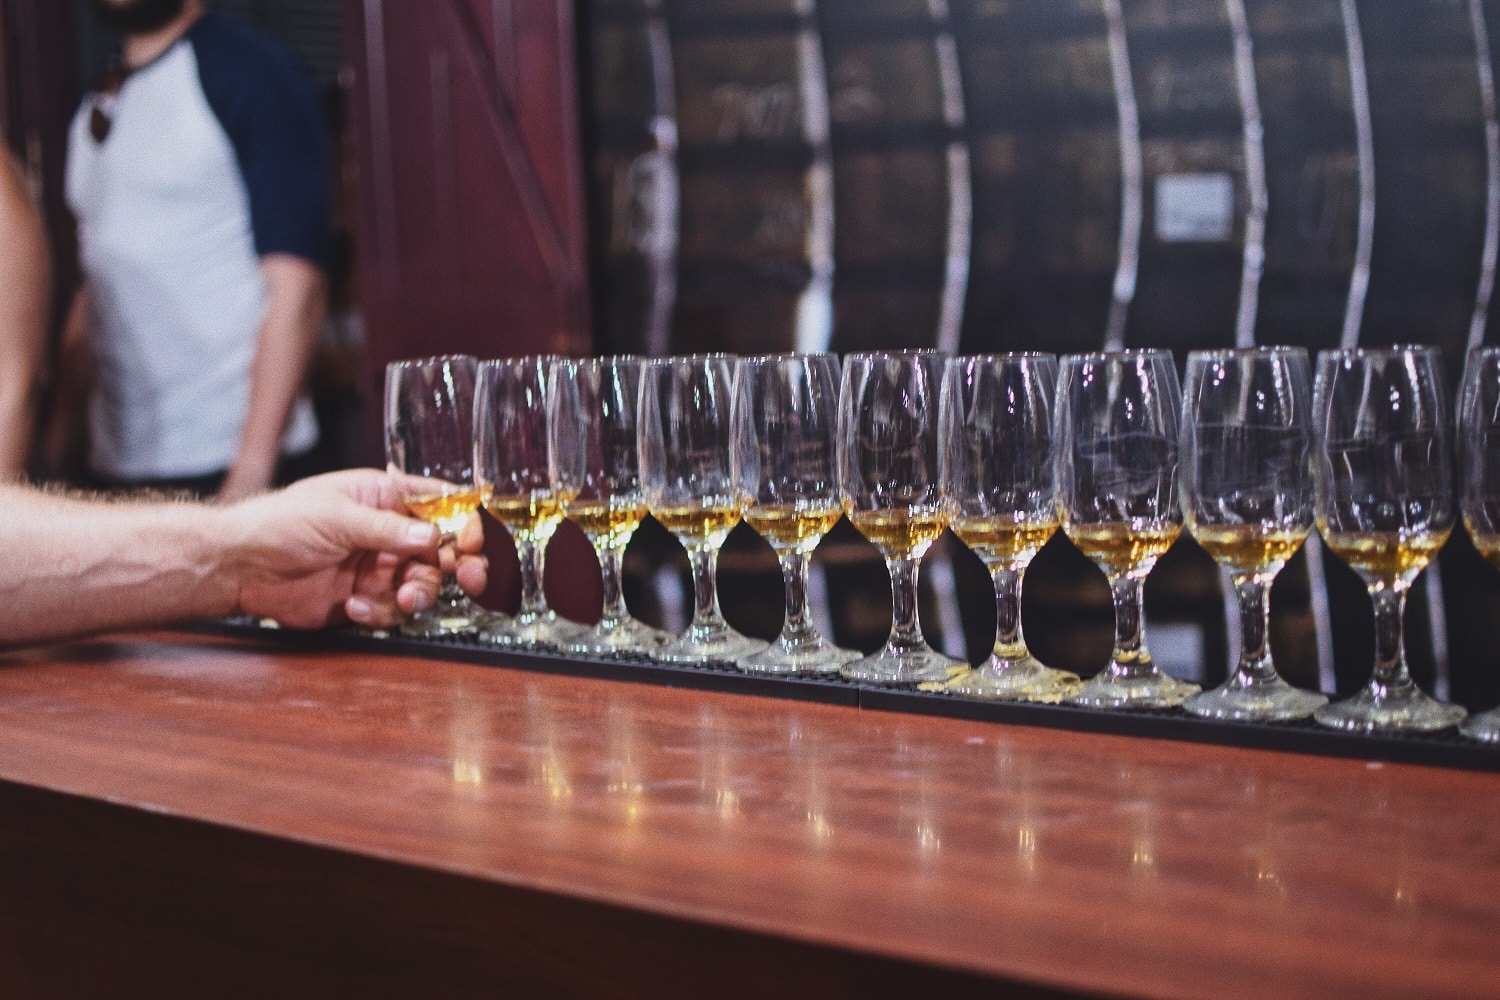 Lineup of rum tasting glasses as someone's hand selects one at a rum tour